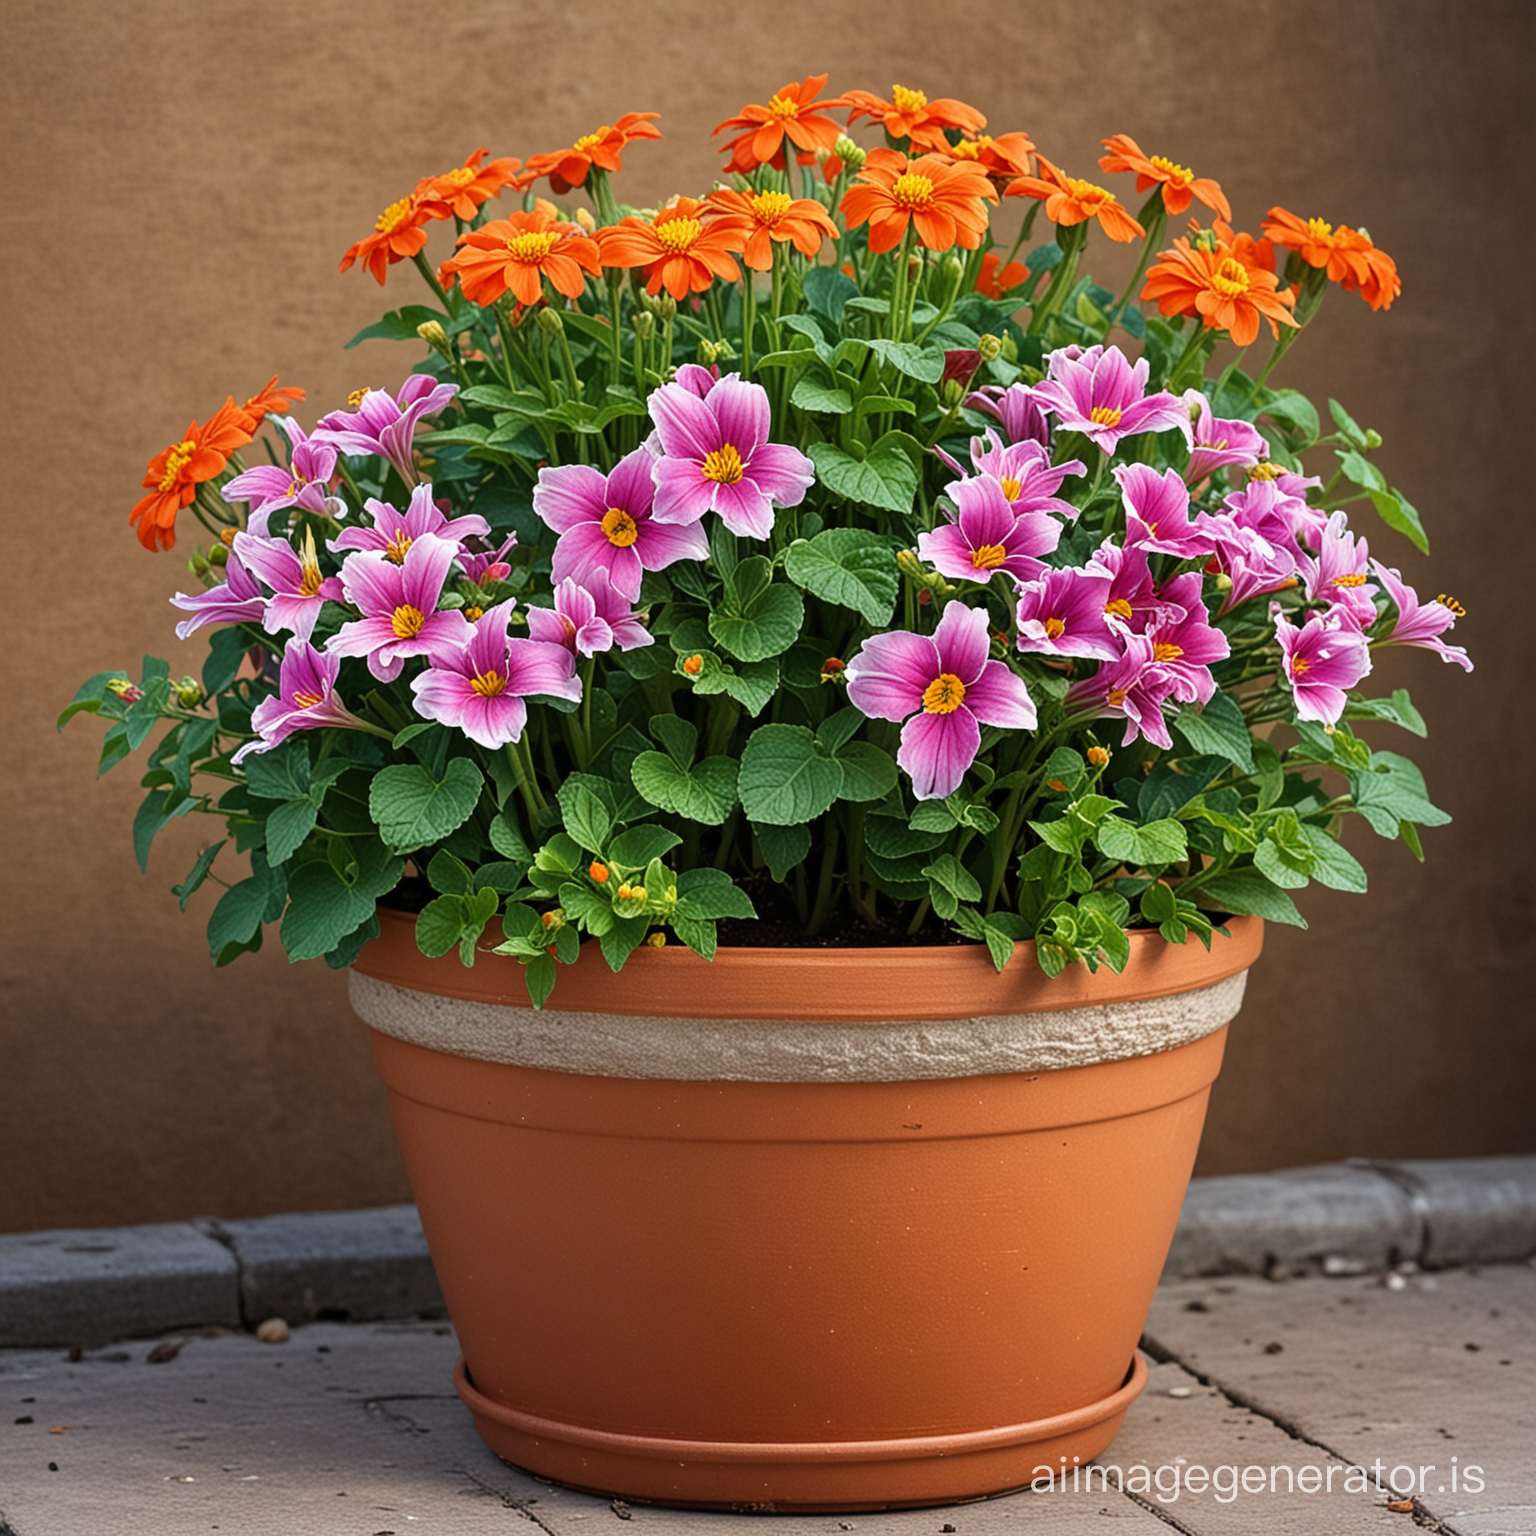 Beautiful Flowerpot with Colorful Flowers | AI Image Generator